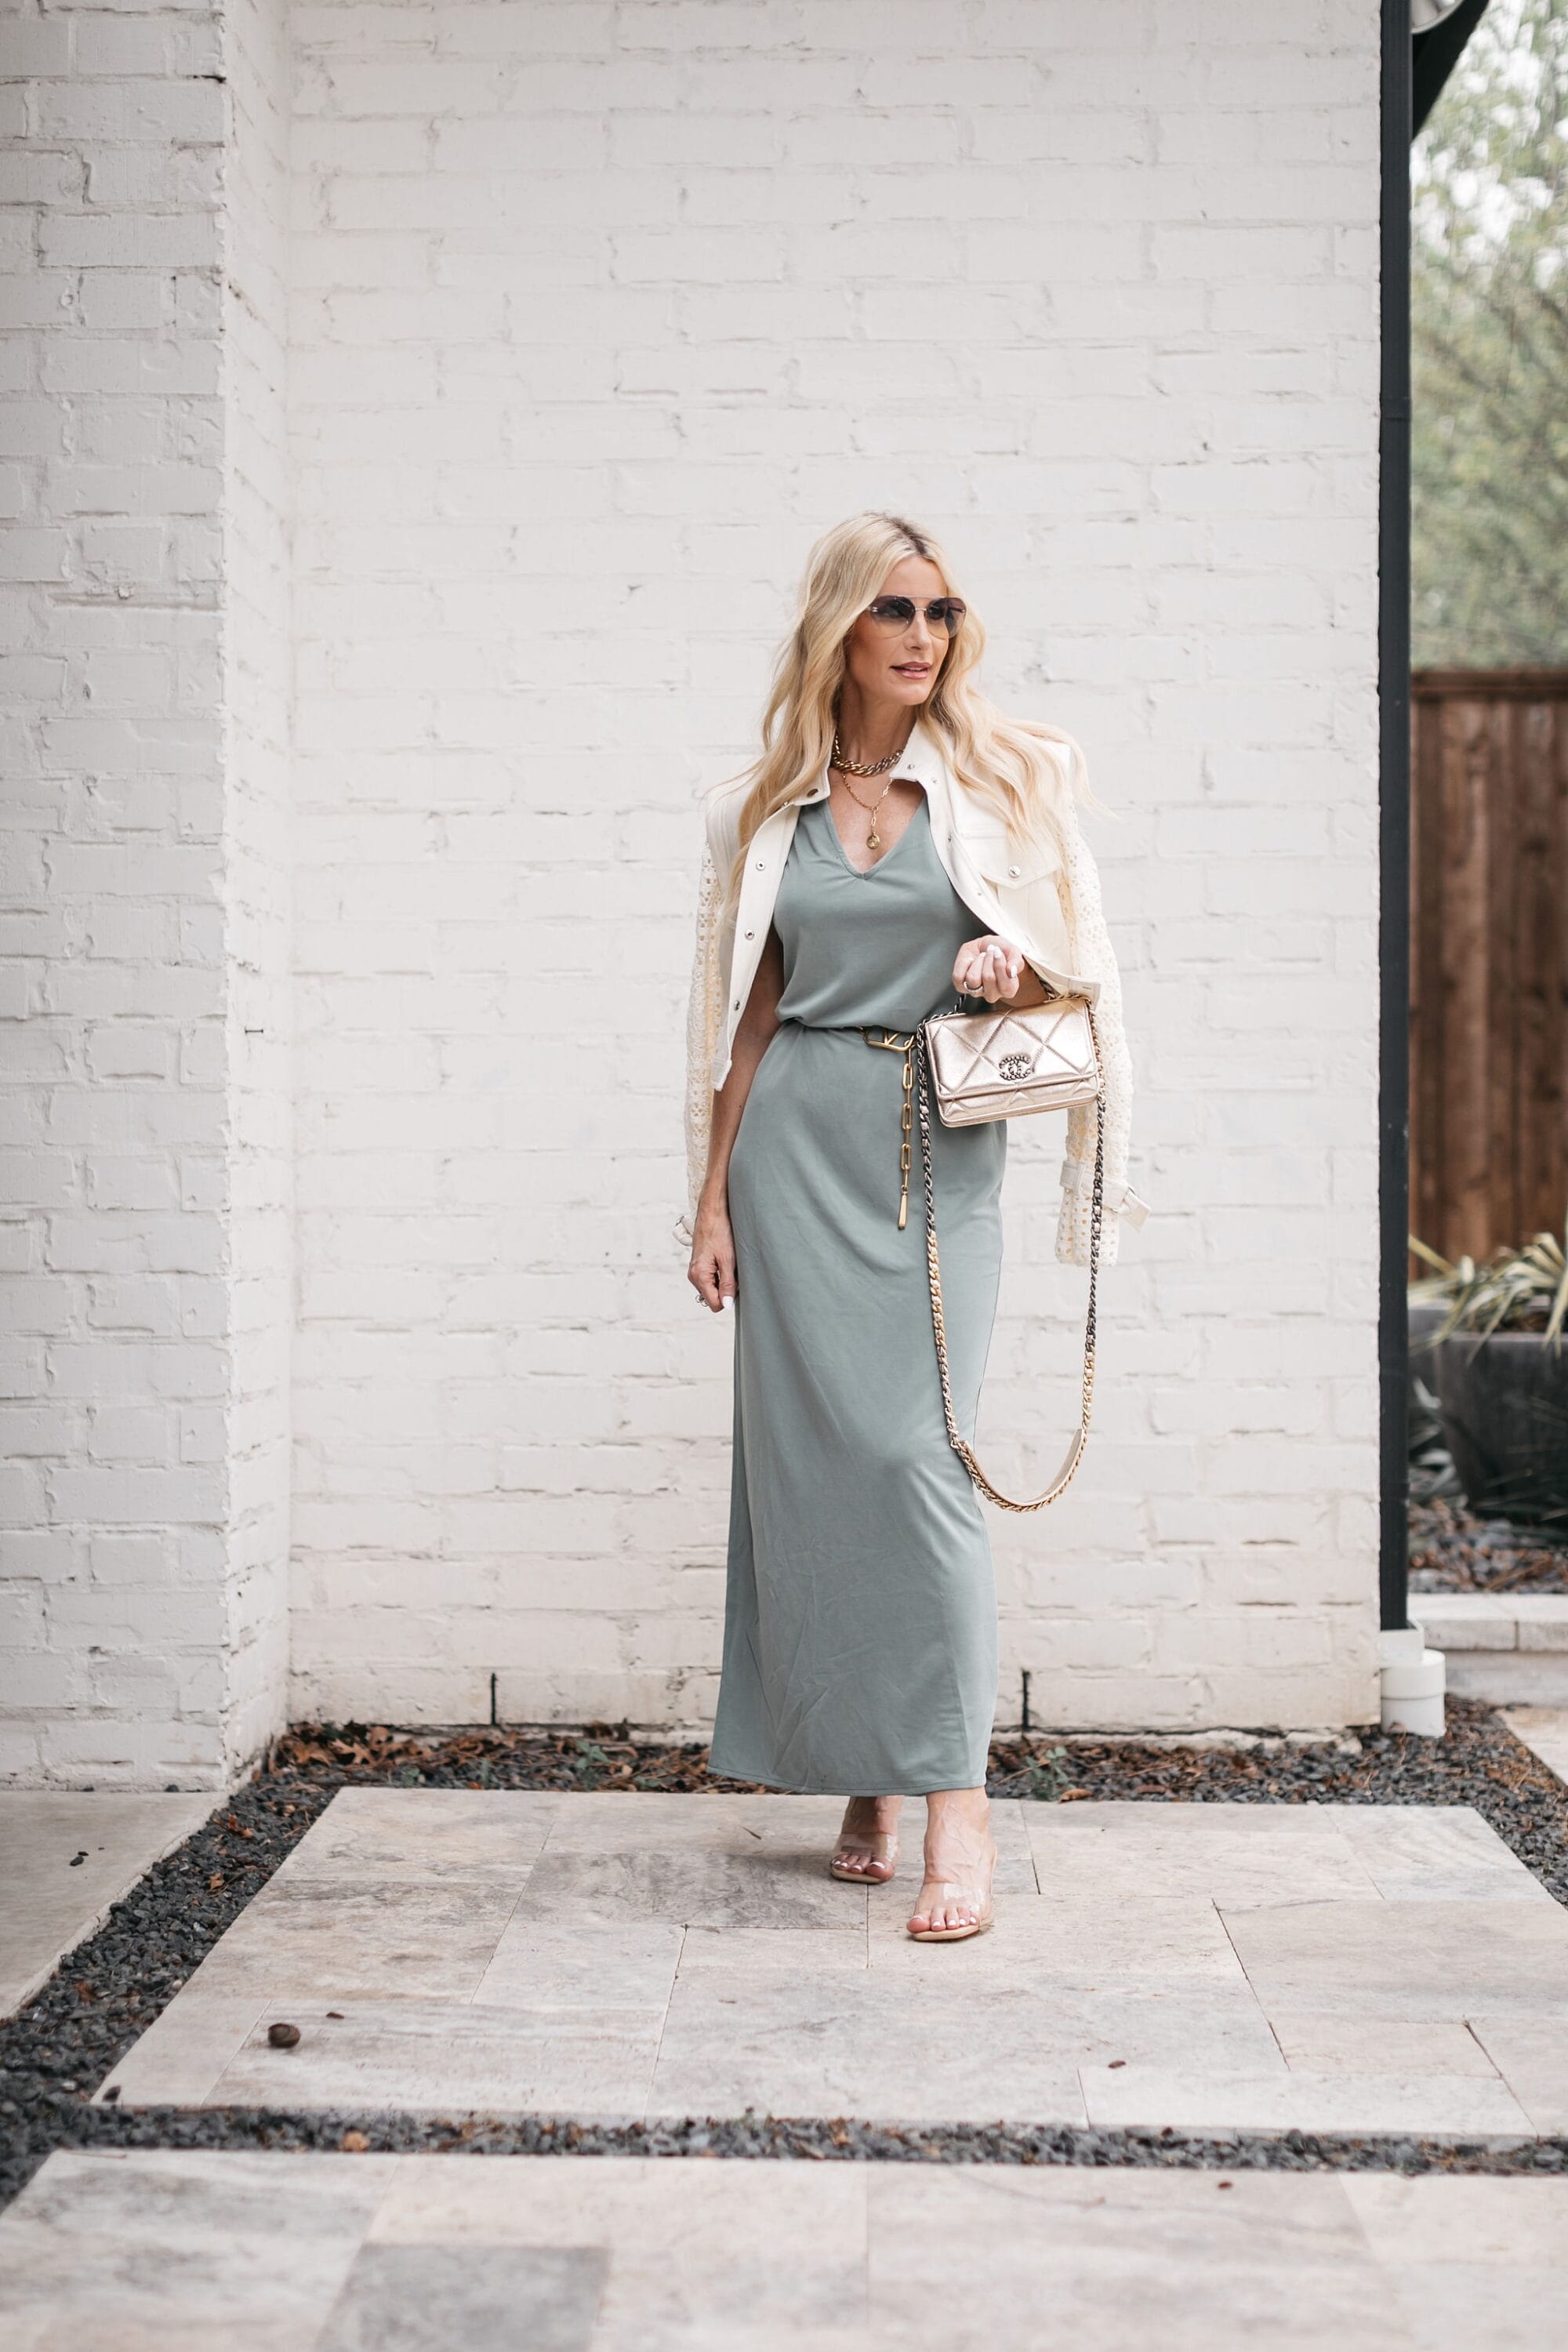 Dallas fashion blogger following rules for items classy women never wear